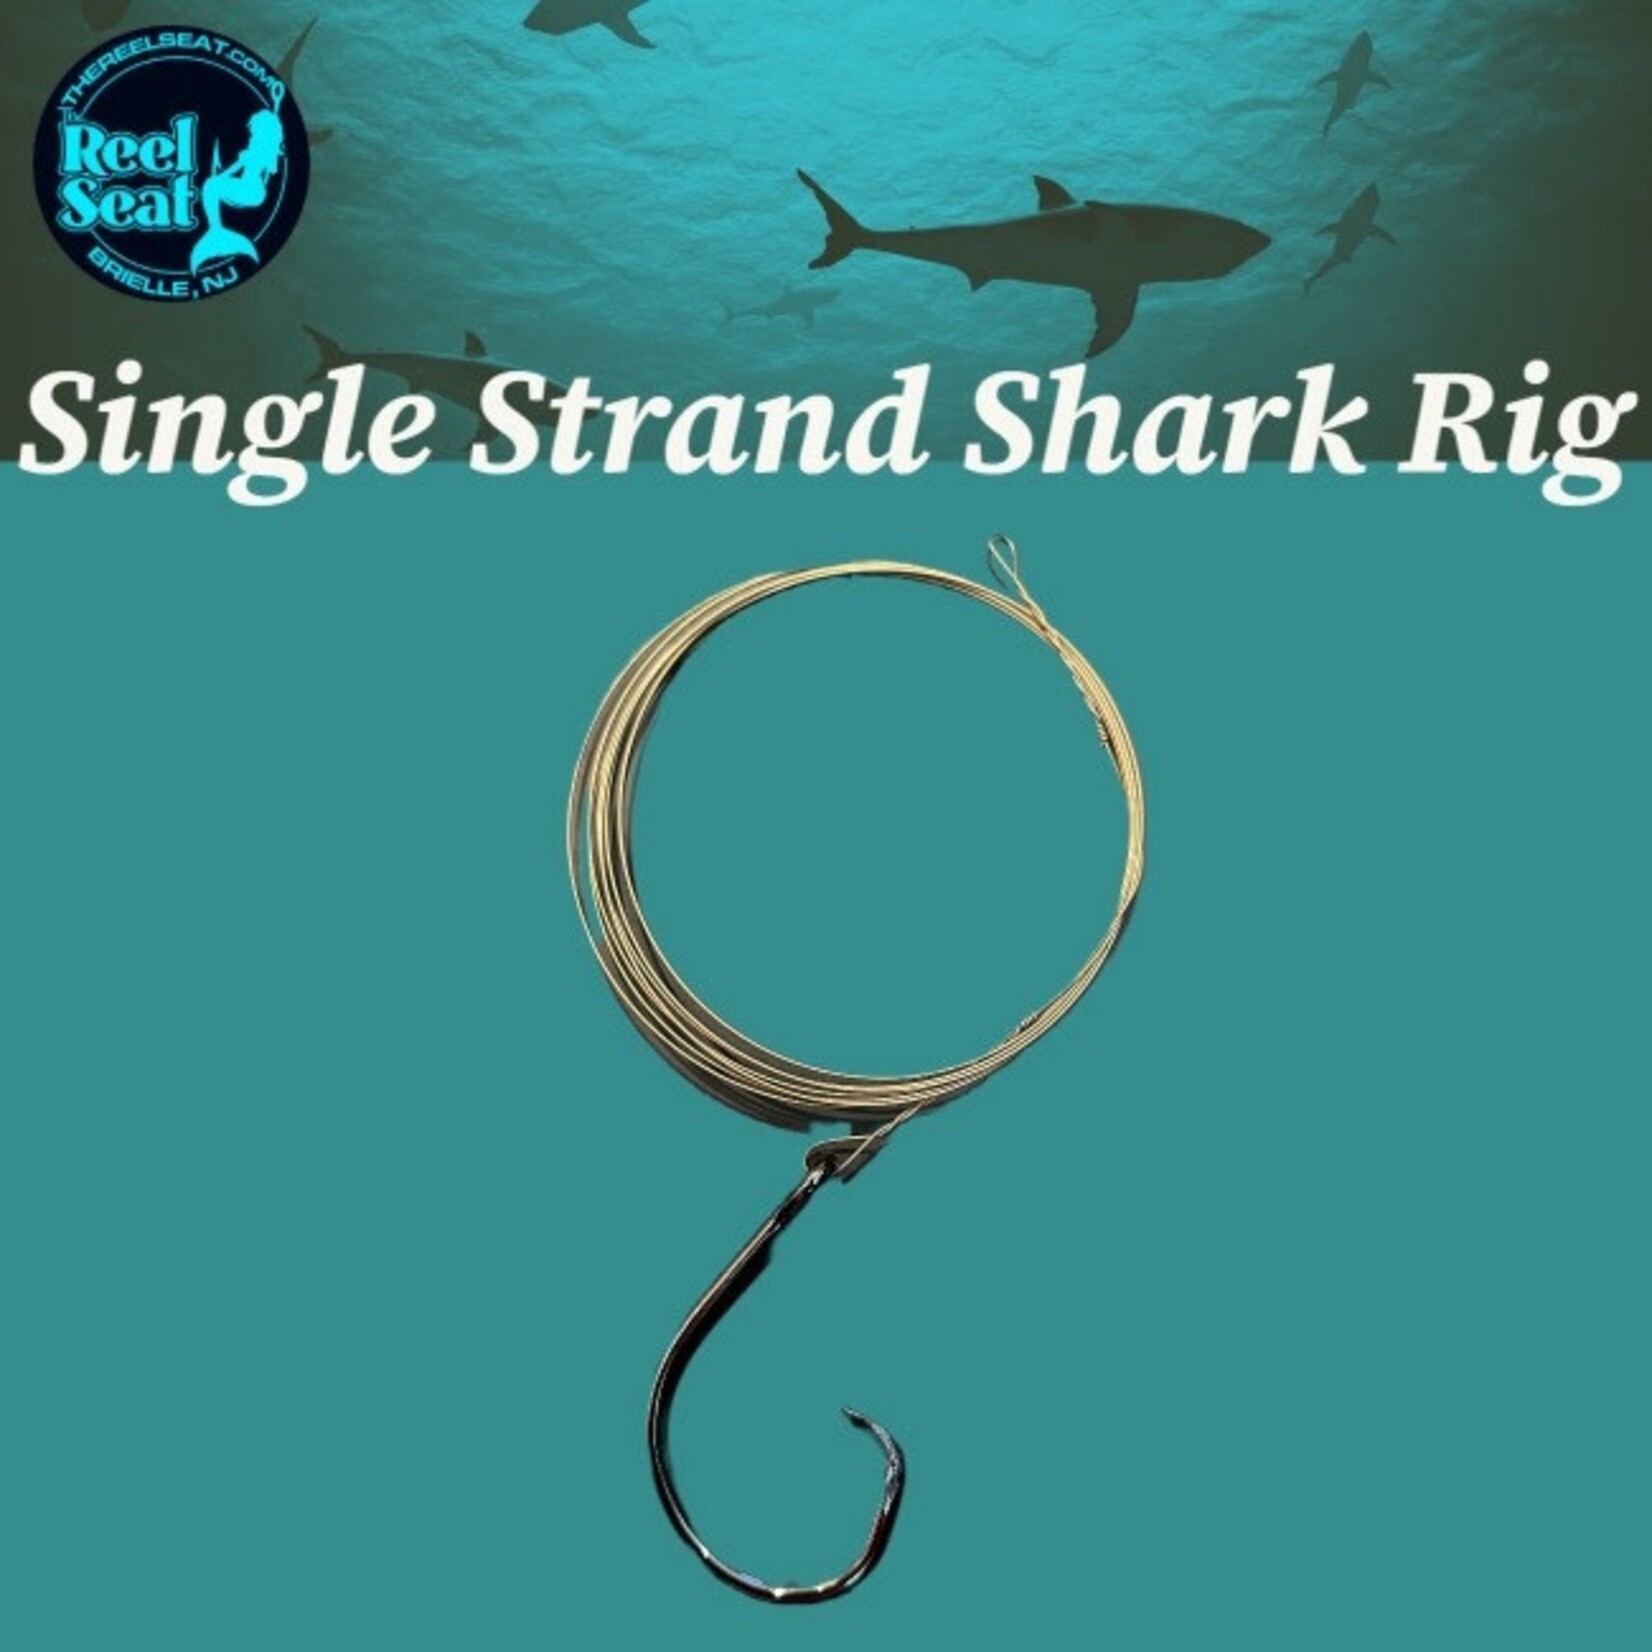 The Reel Seat RS Single Strand Shark Rig